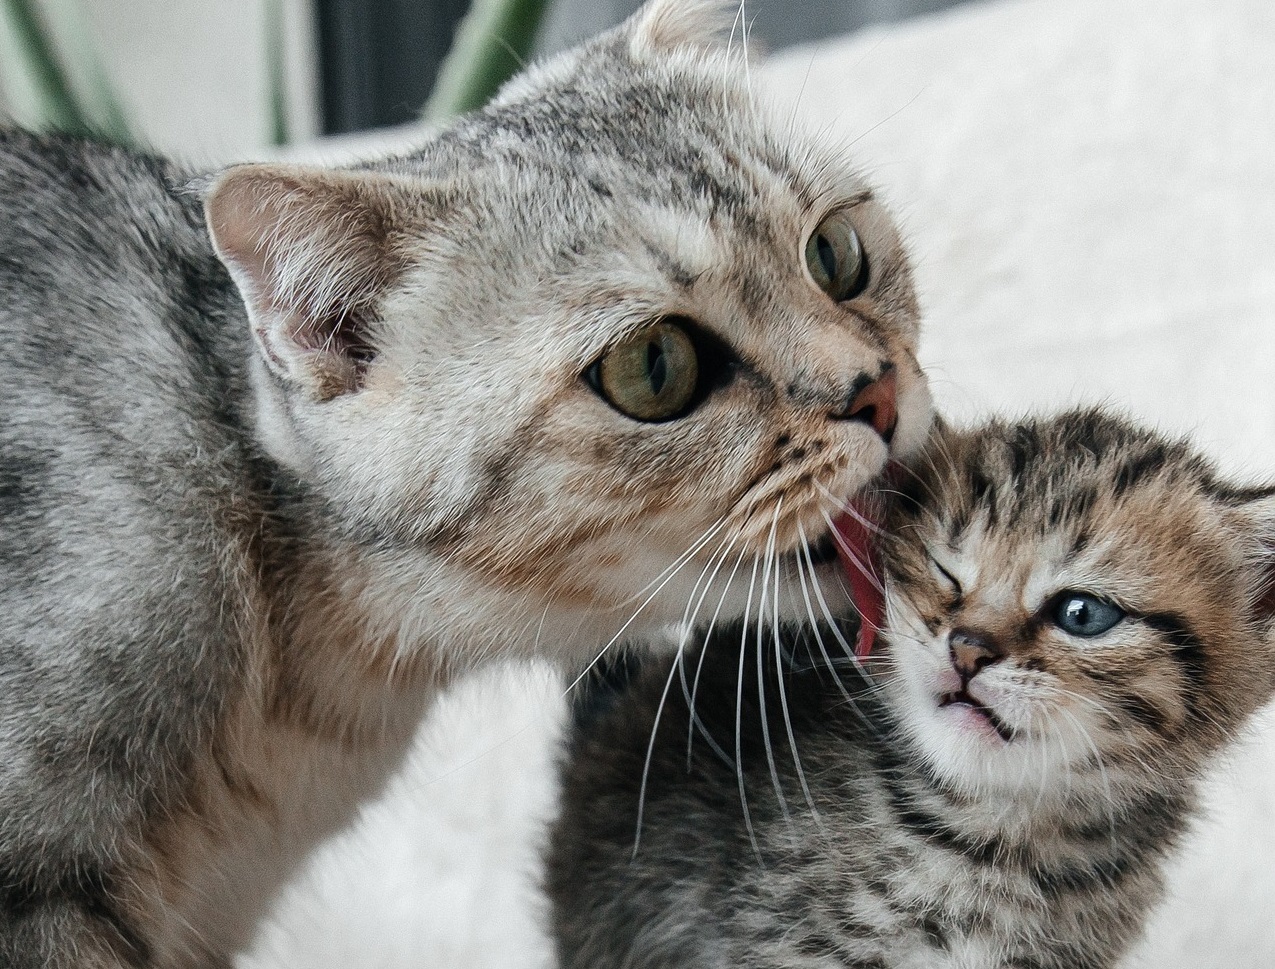 Why Is Your Mother Cat Biting Her Kitten's Neck